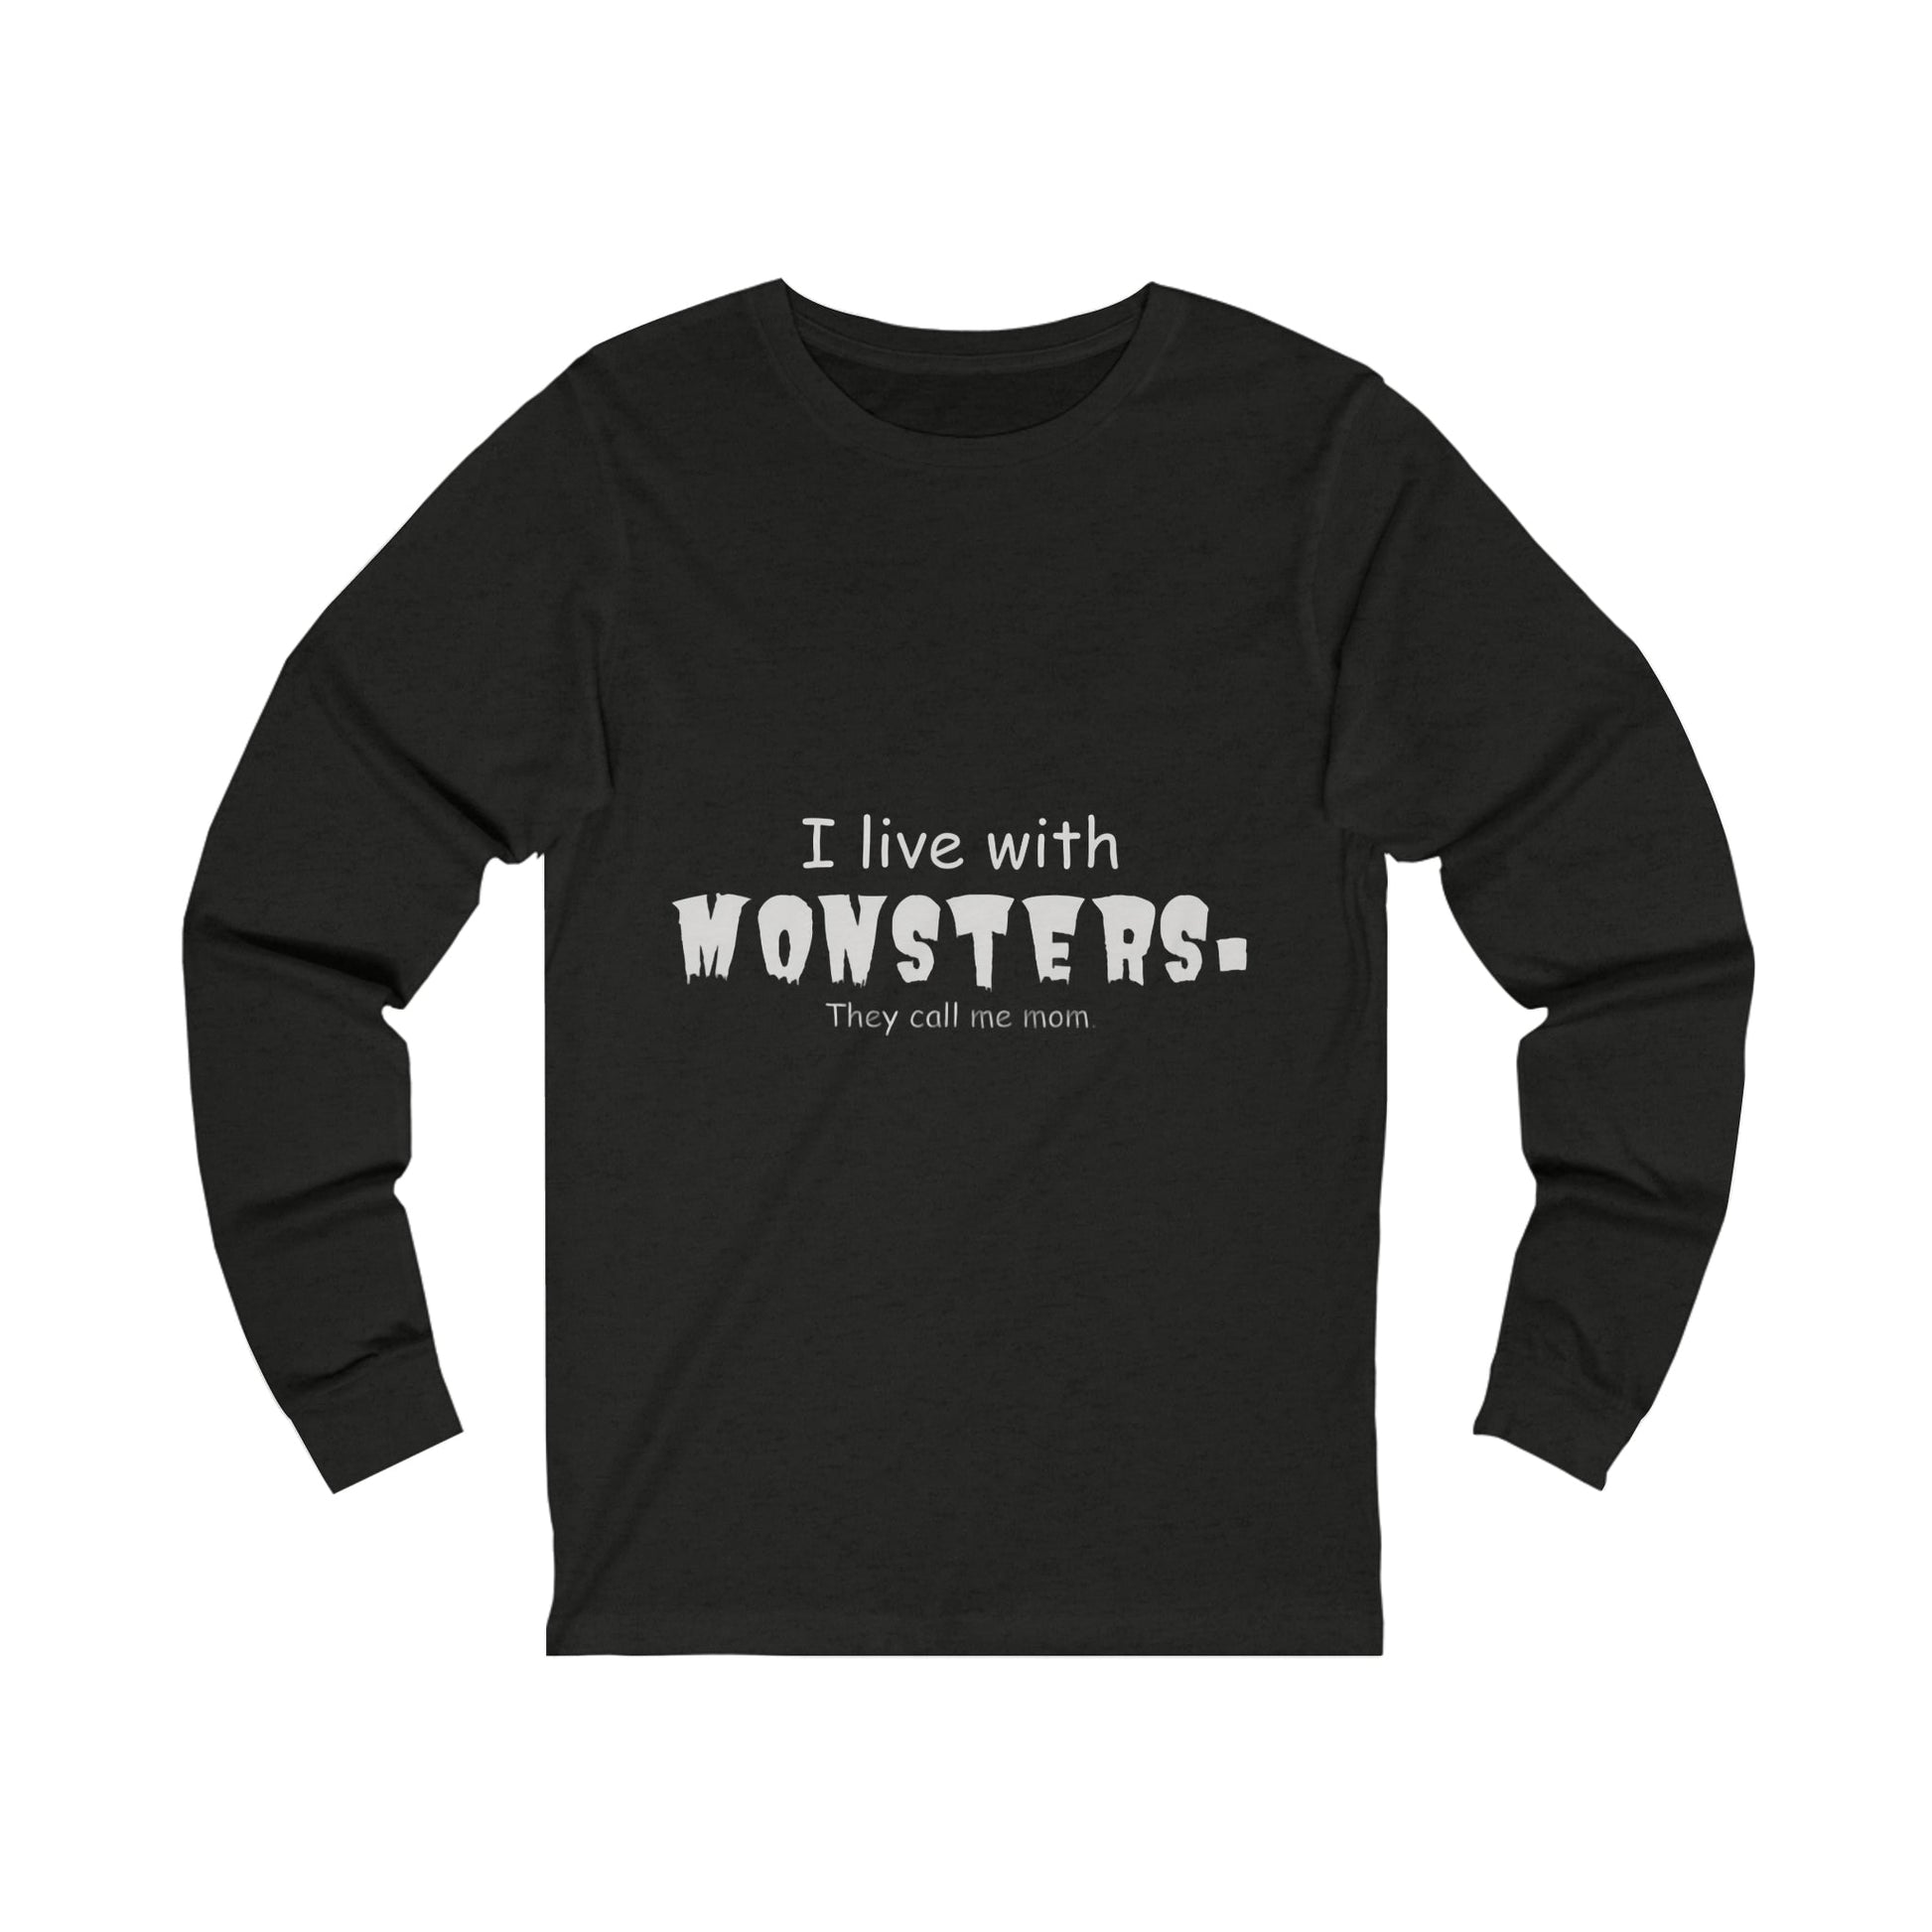 I Live With Monsters They Call Me Mom Jersey Long Sleeve Tee ShirtLong - sleeveVTZdesignsSBlack HeatherCrew neckDTGhalloween